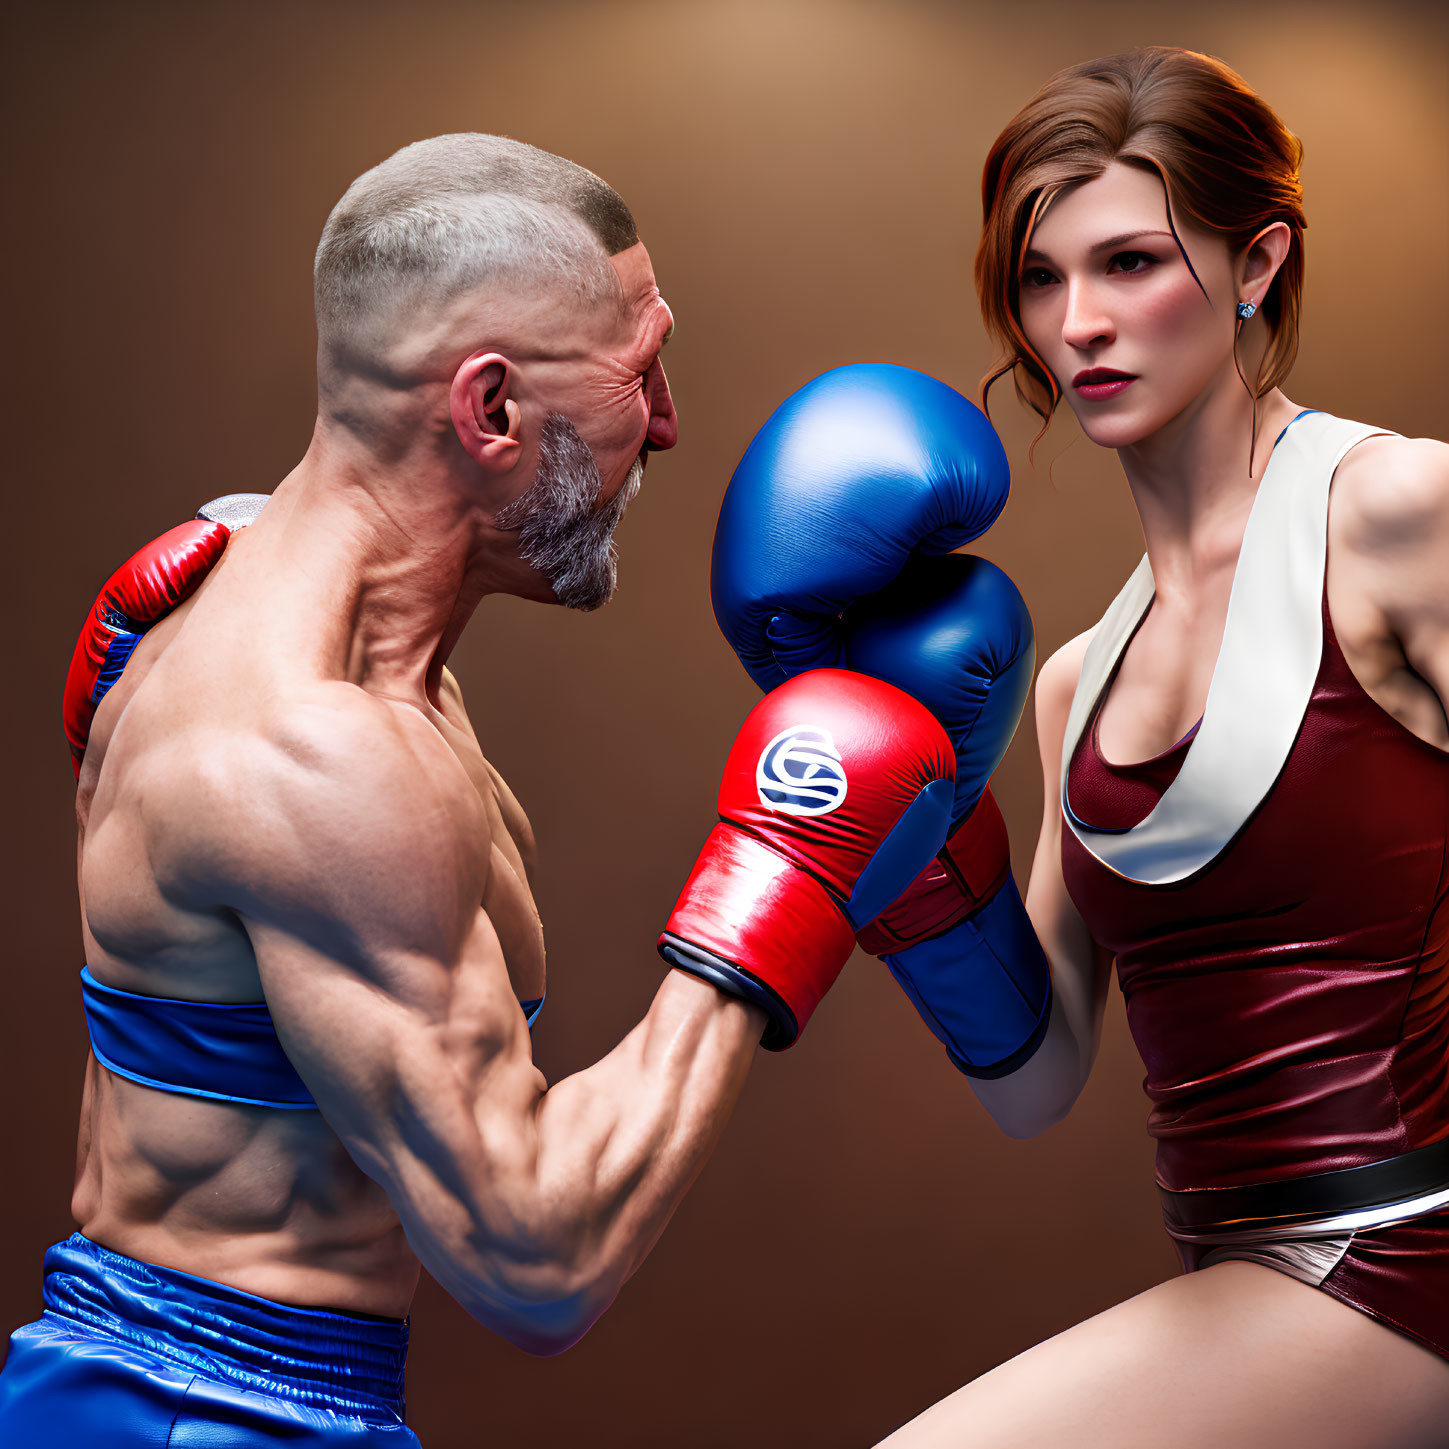 Digital artwork: Muscular older man and fit young woman in boxing stance with gloves.